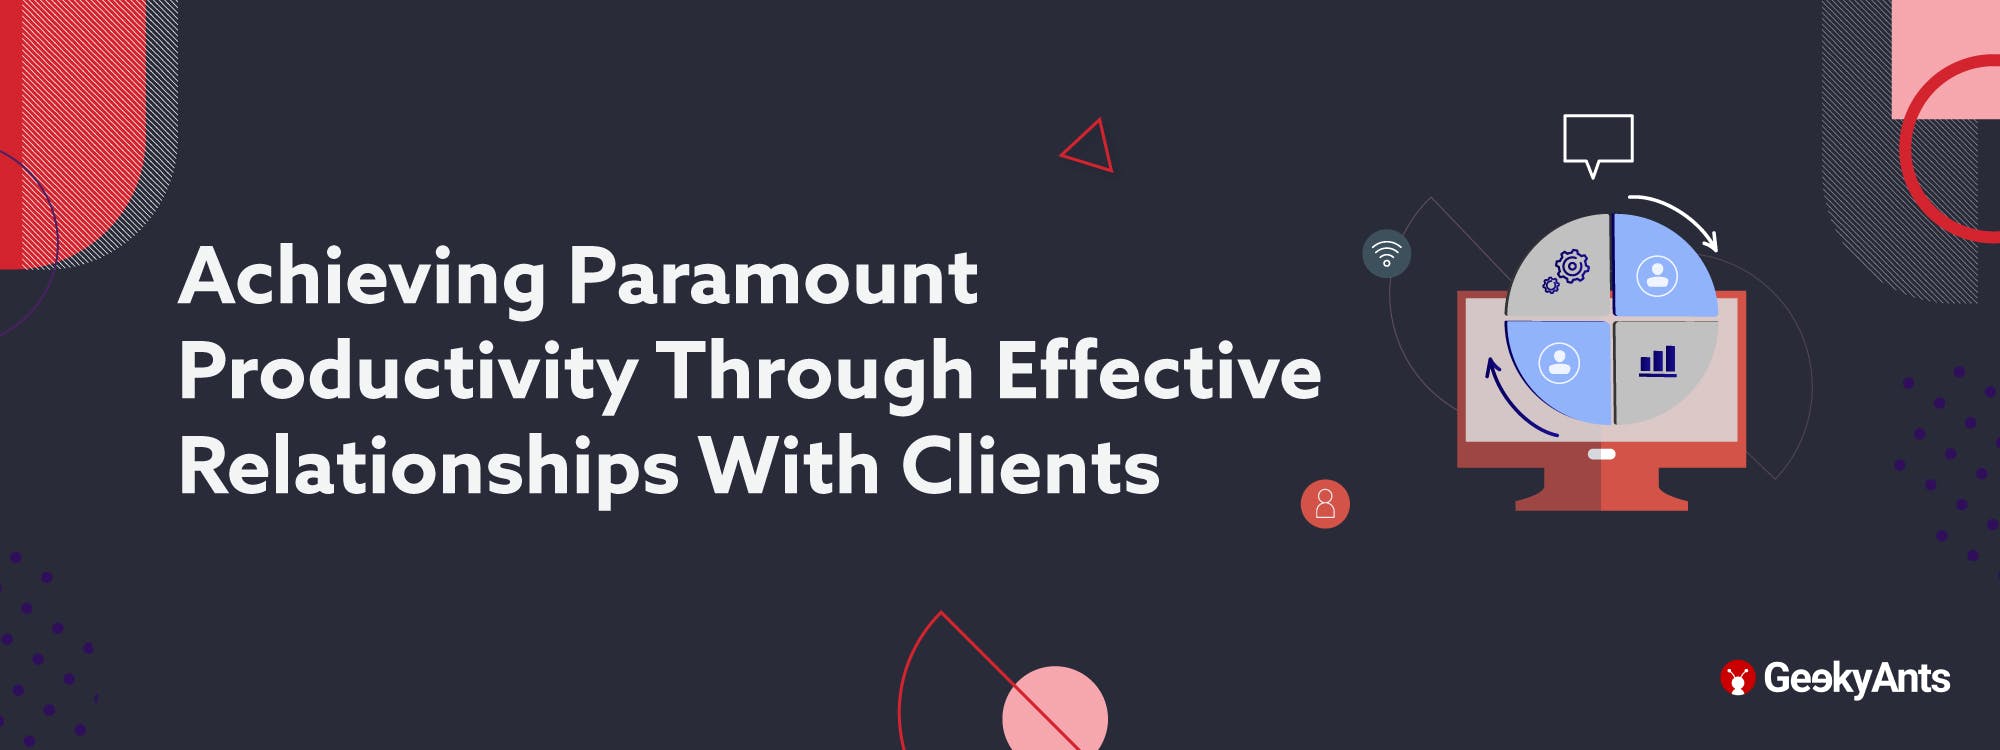 Achieving Paramount Productivity Through Effective Relationships With Clients